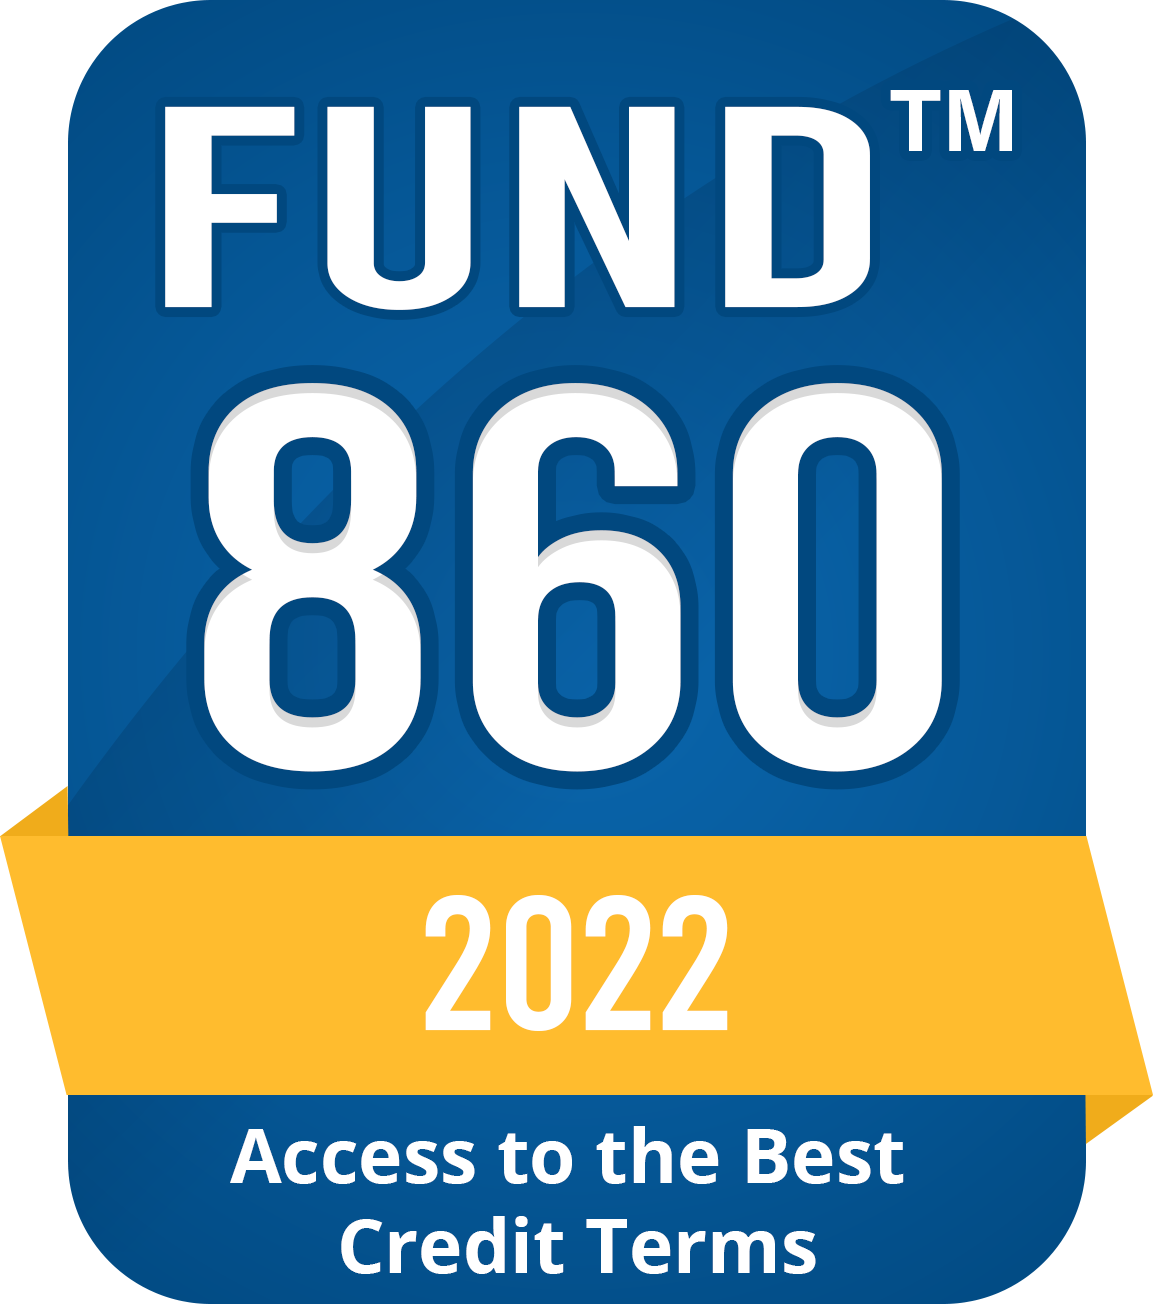 Fund 860 badge, which indicated access to the best credit terms